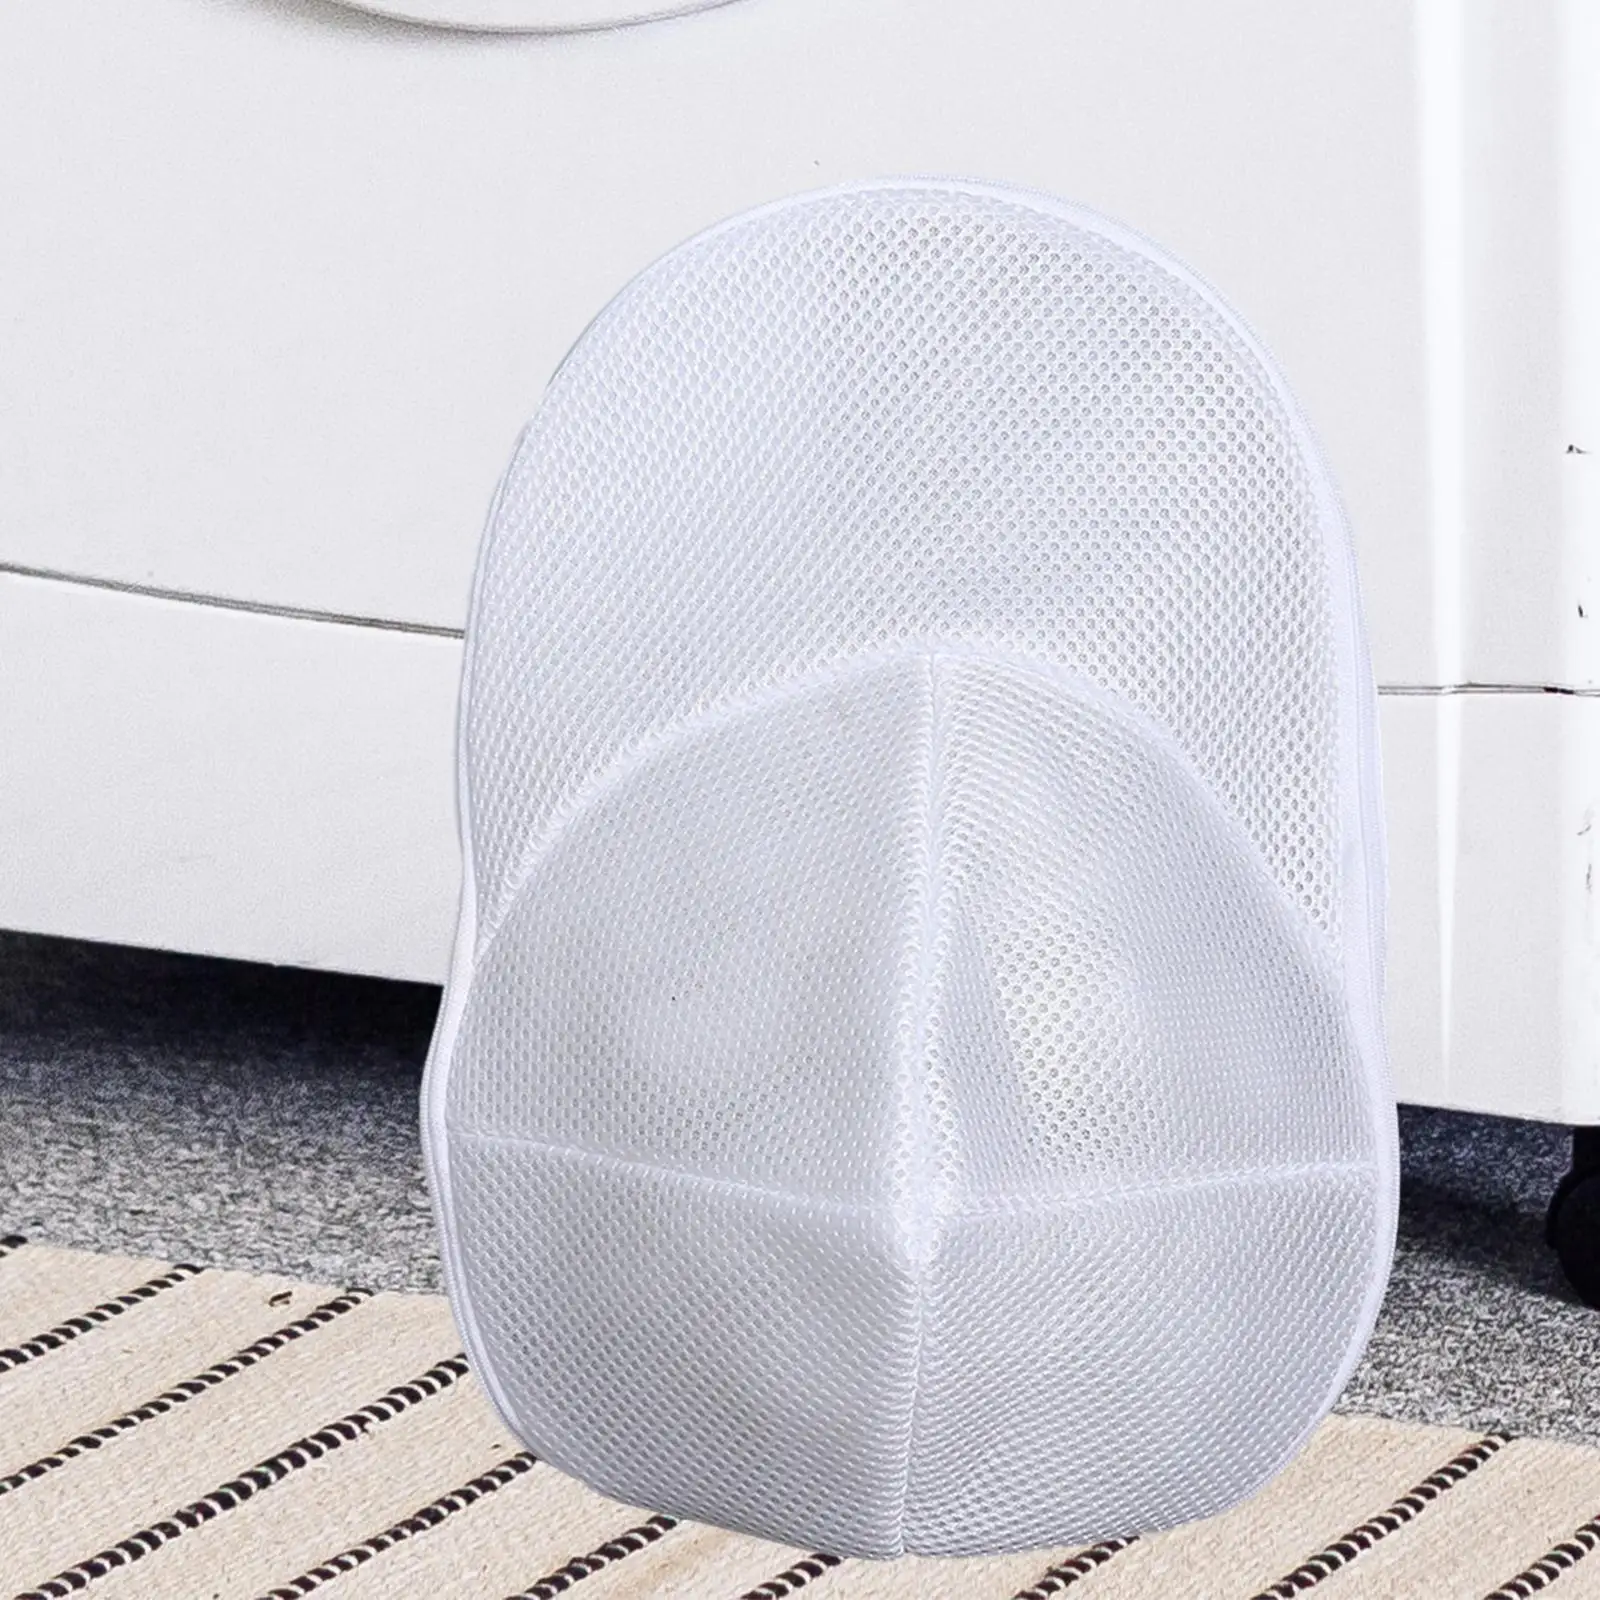 Hat Washer for Washing Machine Hat Laundry Wash Bag Soft Mesh Protection Cap Organizer Hat Washing Protector for Most Hat